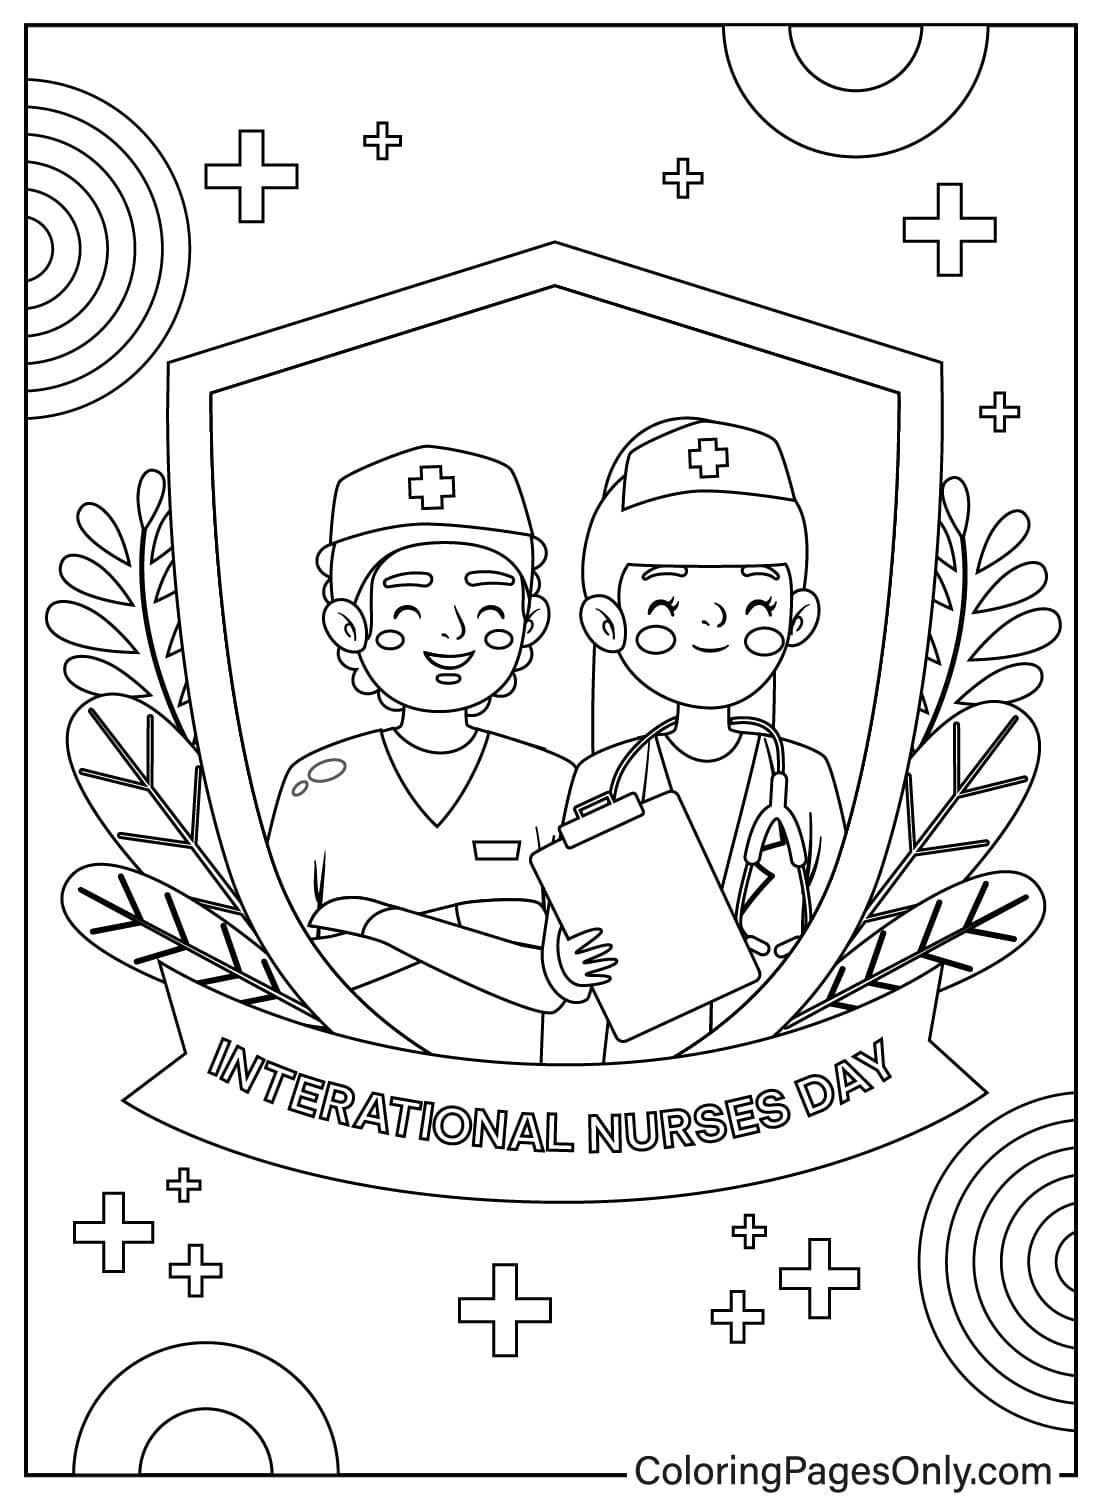 International Nurses Day Coloring Page from Nurse